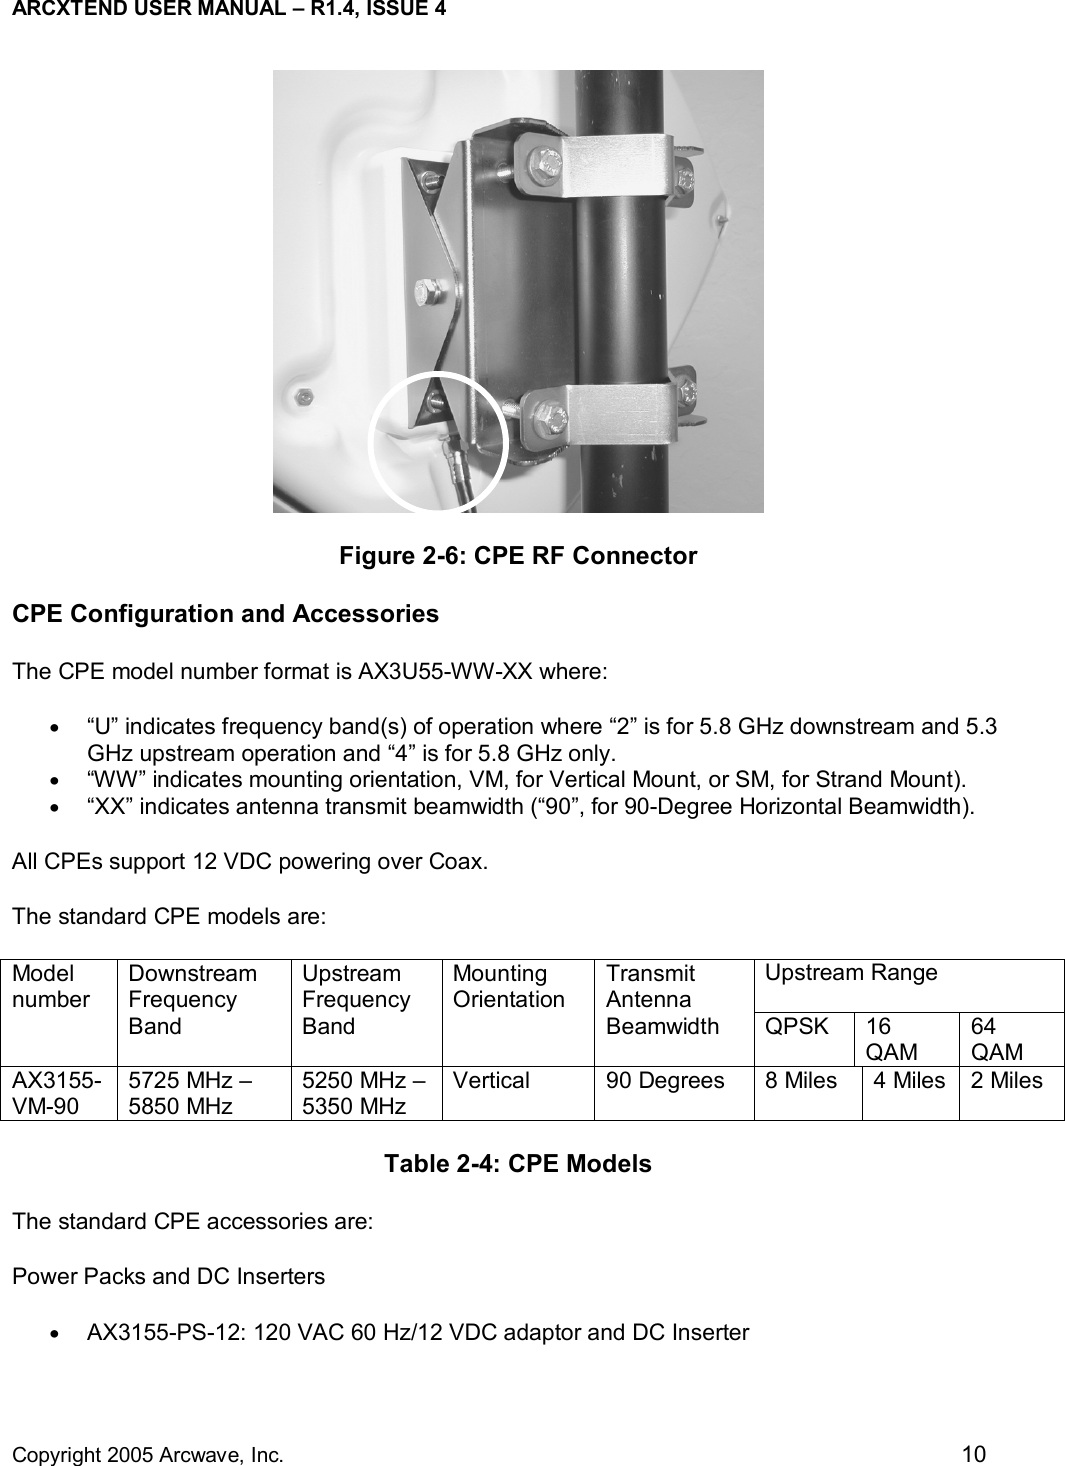 ARCXTEND USER MANUAL – R1.4, ISSUE 4  Copyright 2005 Arcwave, Inc.    10  Figure 2-6: CPE RF Connector CPE Configuration and Accessories The CPE model number format is AX3U55-WW-XX where: •  “U” indicates frequency band(s) of operation where “2” is for 5.8 GHz downstream and 5.3 GHz upstream operation and “4” is for 5.8 GHz only. •  “WW” indicates mounting orientation, VM, for Vertical Mount, or SM, for Strand Mount).  •  “XX” indicates antenna transmit beamwidth (“90”, for 90-Degree Horizontal Beamwidth). All CPEs support 12 VDC powering over Coax.  The standard CPE models are: Upstream Range Model number Downstream Frequency Band Upstream Frequency Band Mounting Orientation Transmit Antenna Beamwidth QPSK 16 QAM 64 QAM AX3155-VM-90 5725 MHz – 5850 MHz 5250 MHz – 5350 MHz Vertical  90 Degrees  8 Miles  4 Miles  2 Miles Table 2-4: CPE Models The standard CPE accessories are: Power Packs and DC Inserters •  AX3155-PS-12: 120 VAC 60 Hz/12 VDC adaptor and DC Inserter 